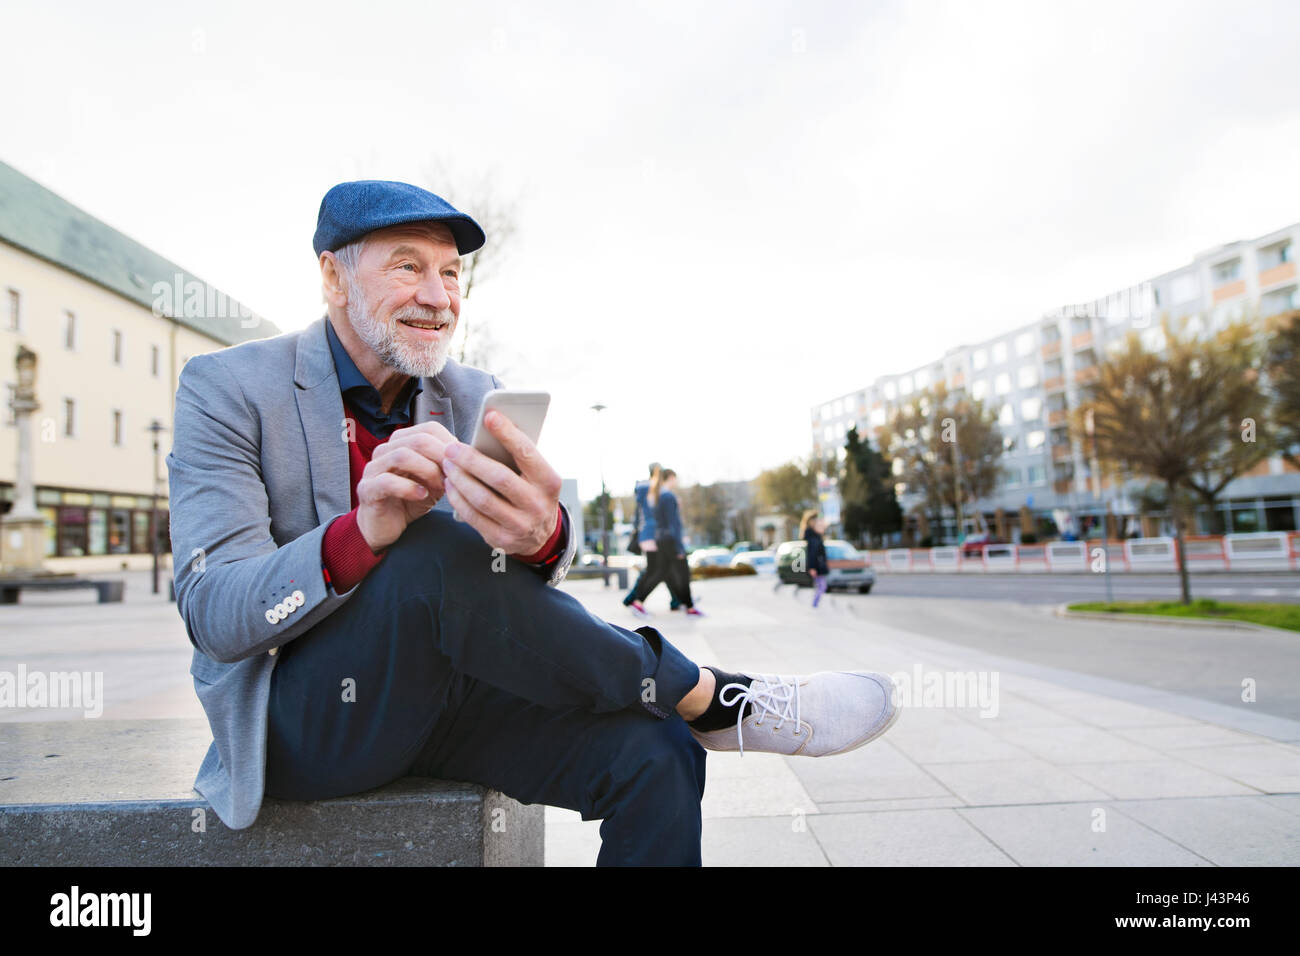 Senior man in town with smart phone, texting Stock Photo